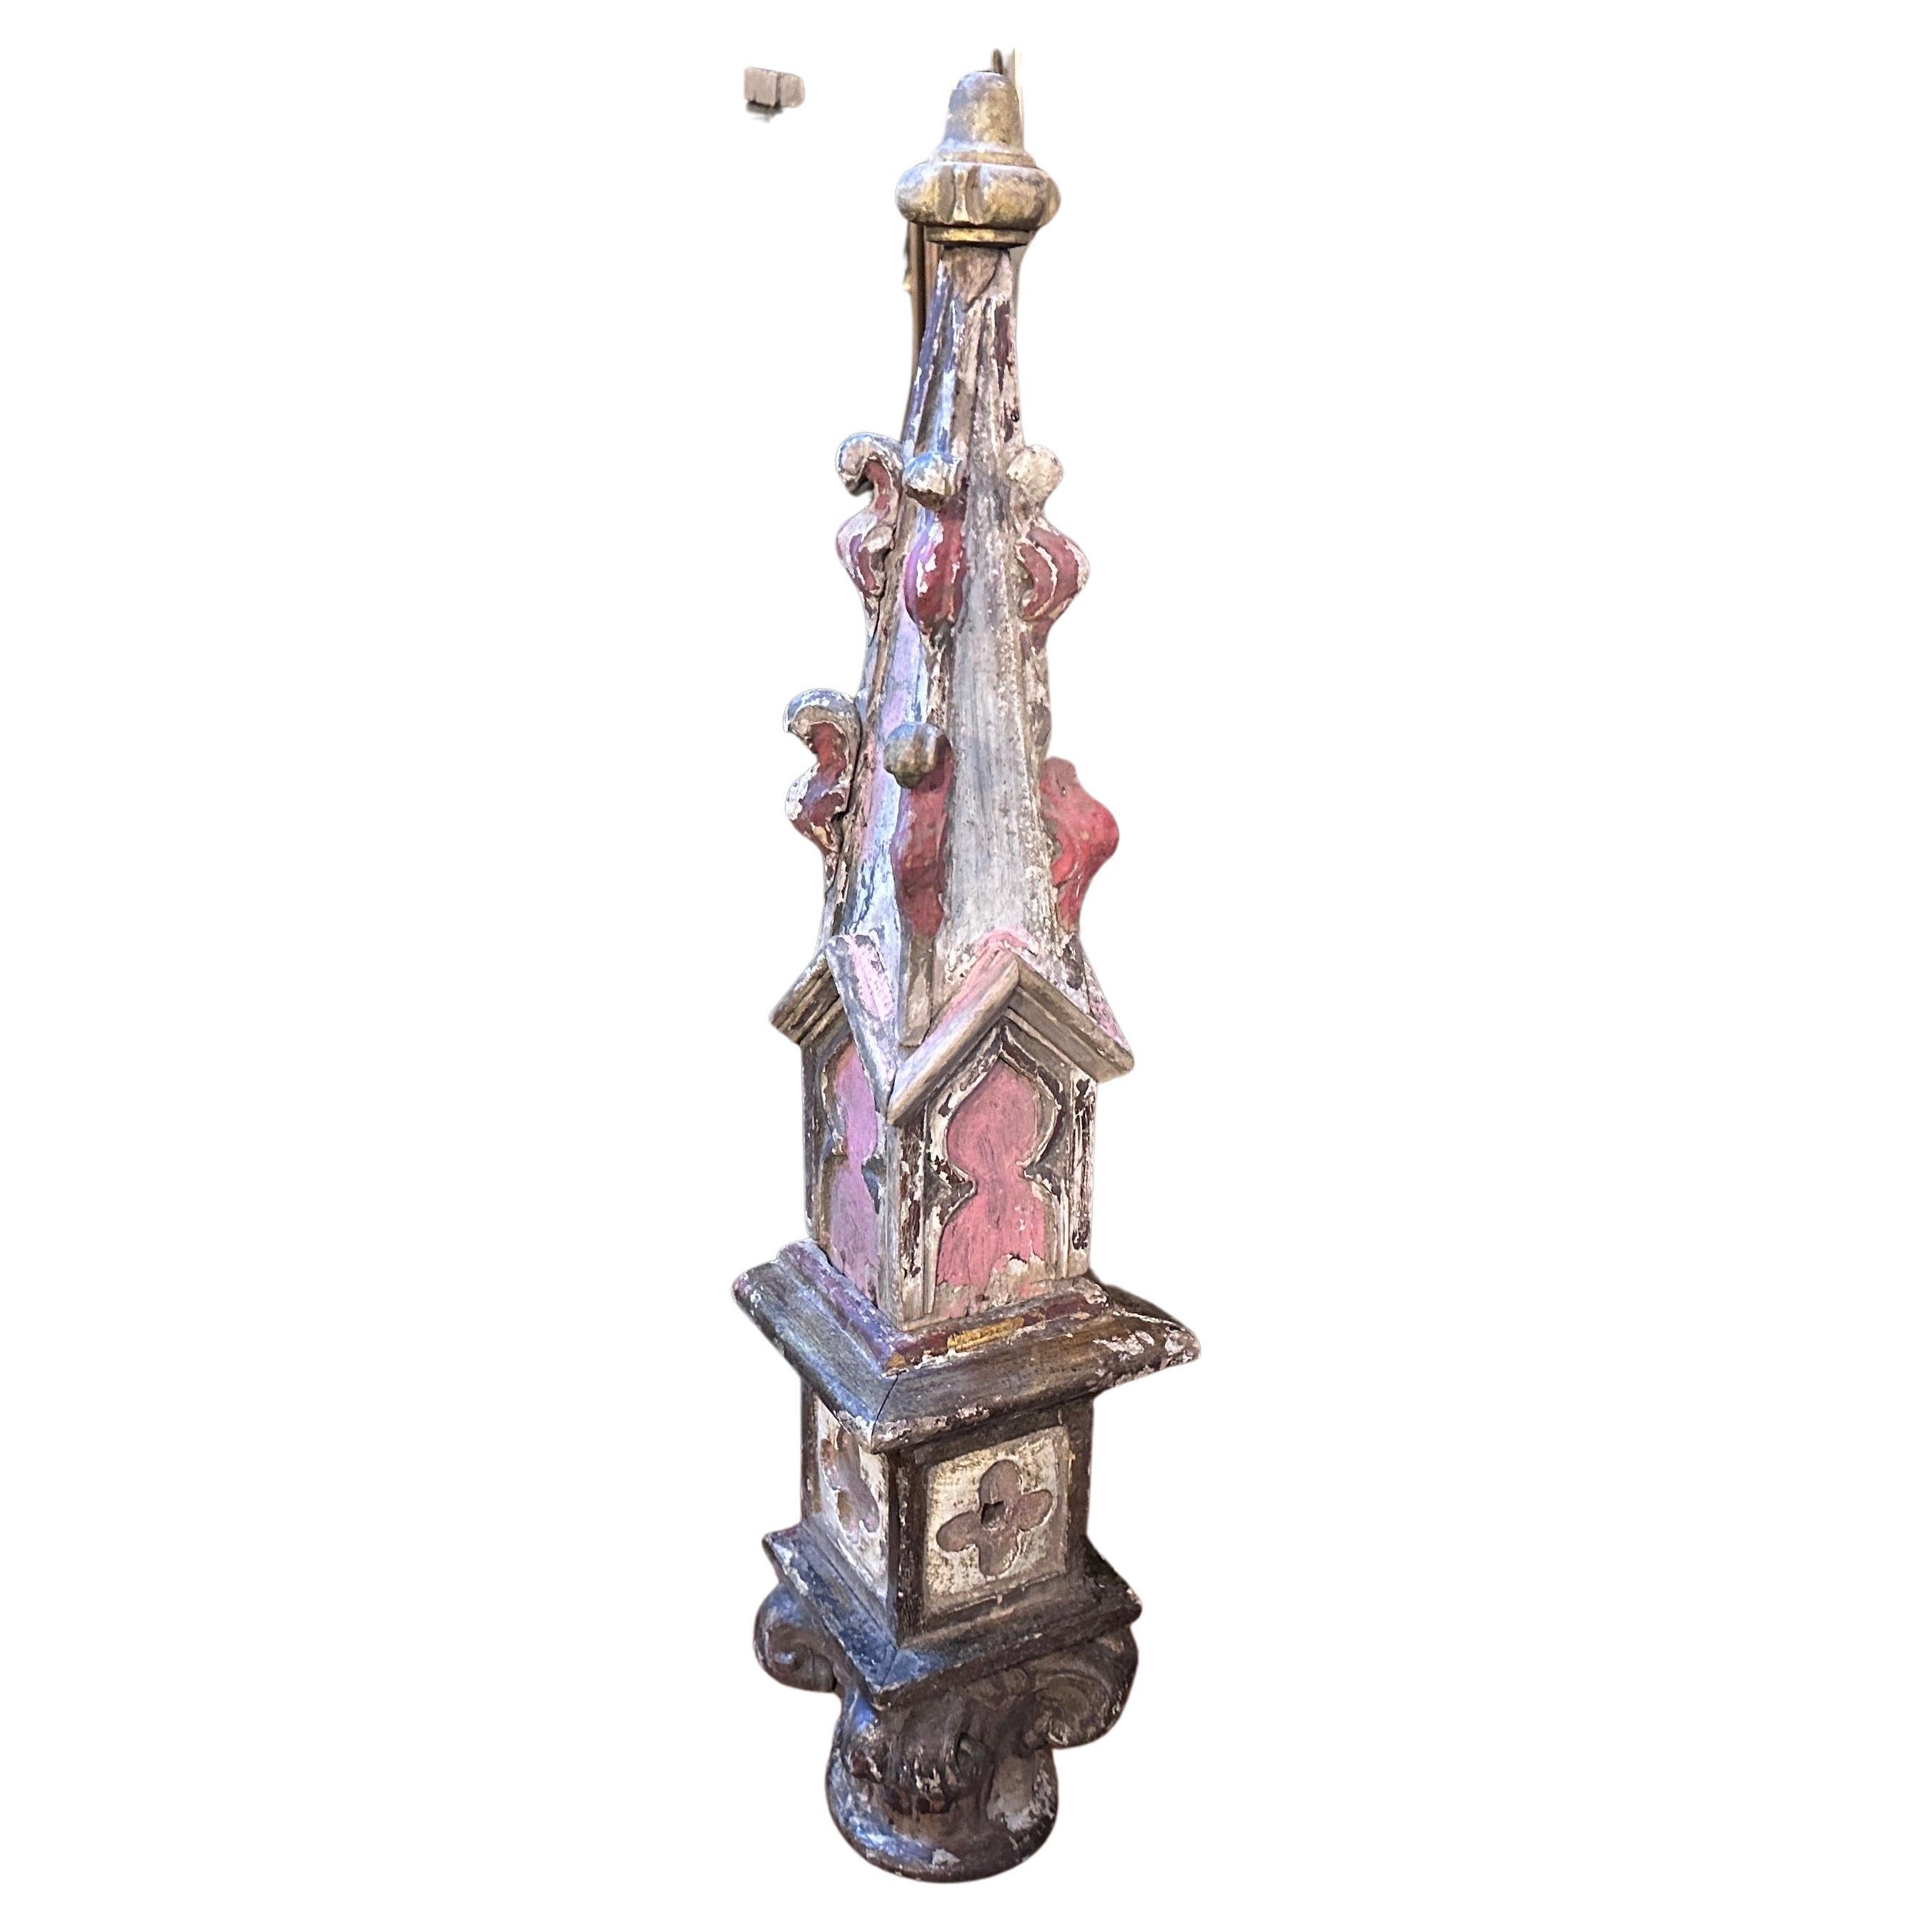 This Sicilian fragment sculpture of an obelisk it's an exquisite piece of art, combining the aesthetics of the Louis XV period with Sicilian craftsmanship and influences. The Louis XV style, named after the French king who reigned from 1715 to 1774,